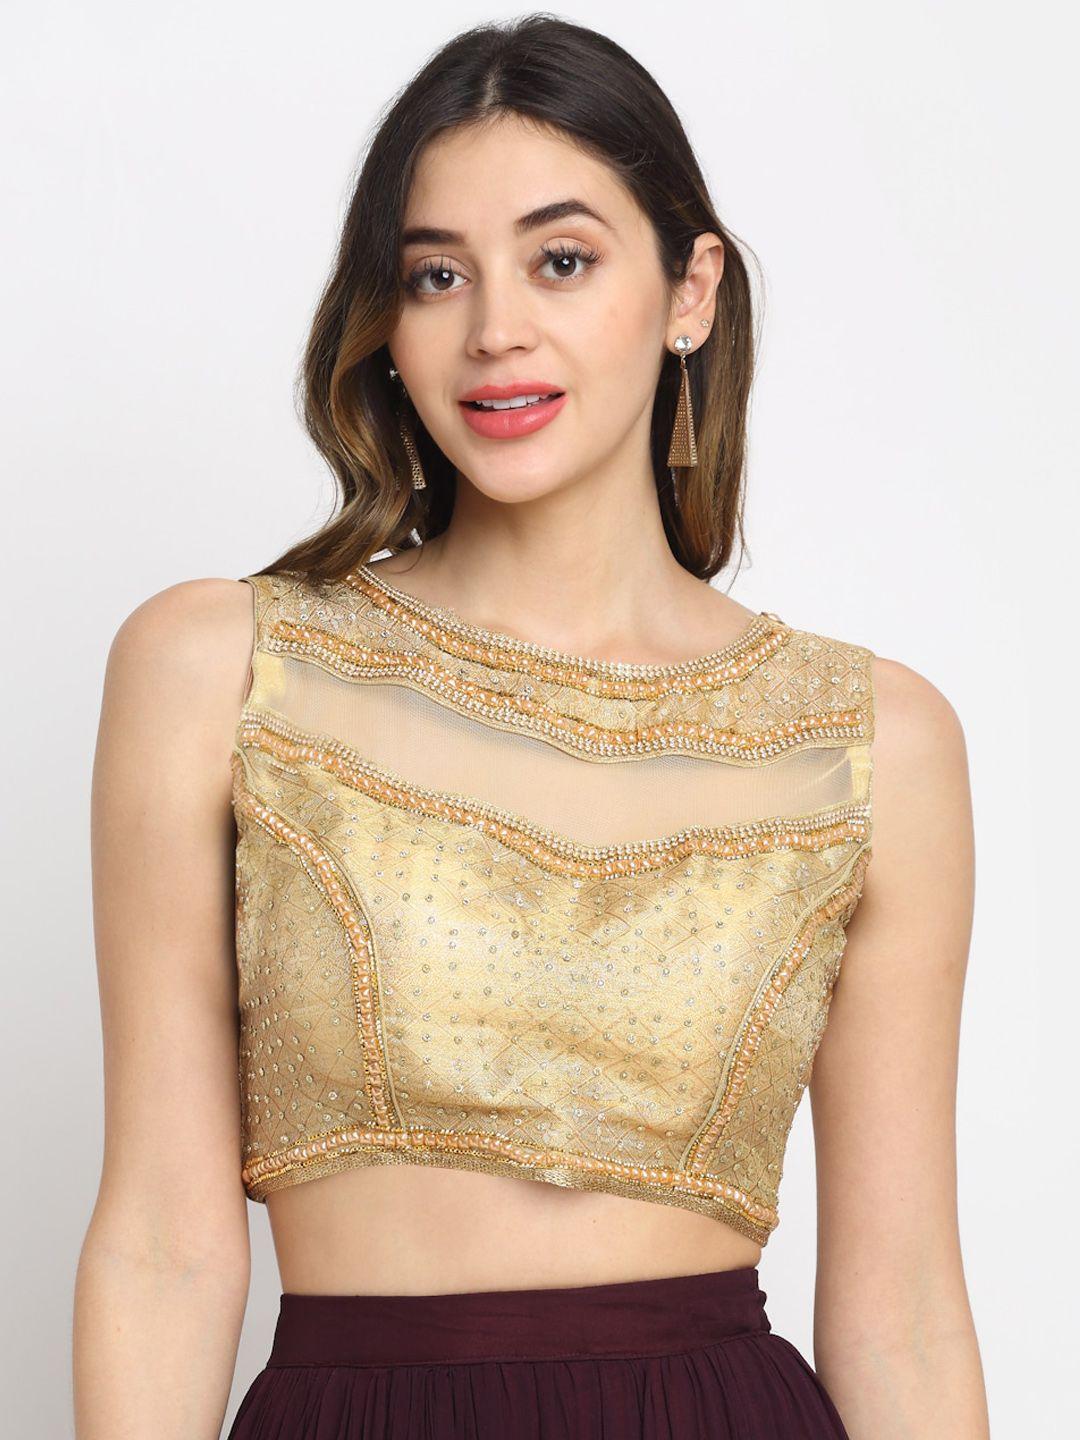 grancy women gold-coloured embellished saree blouse